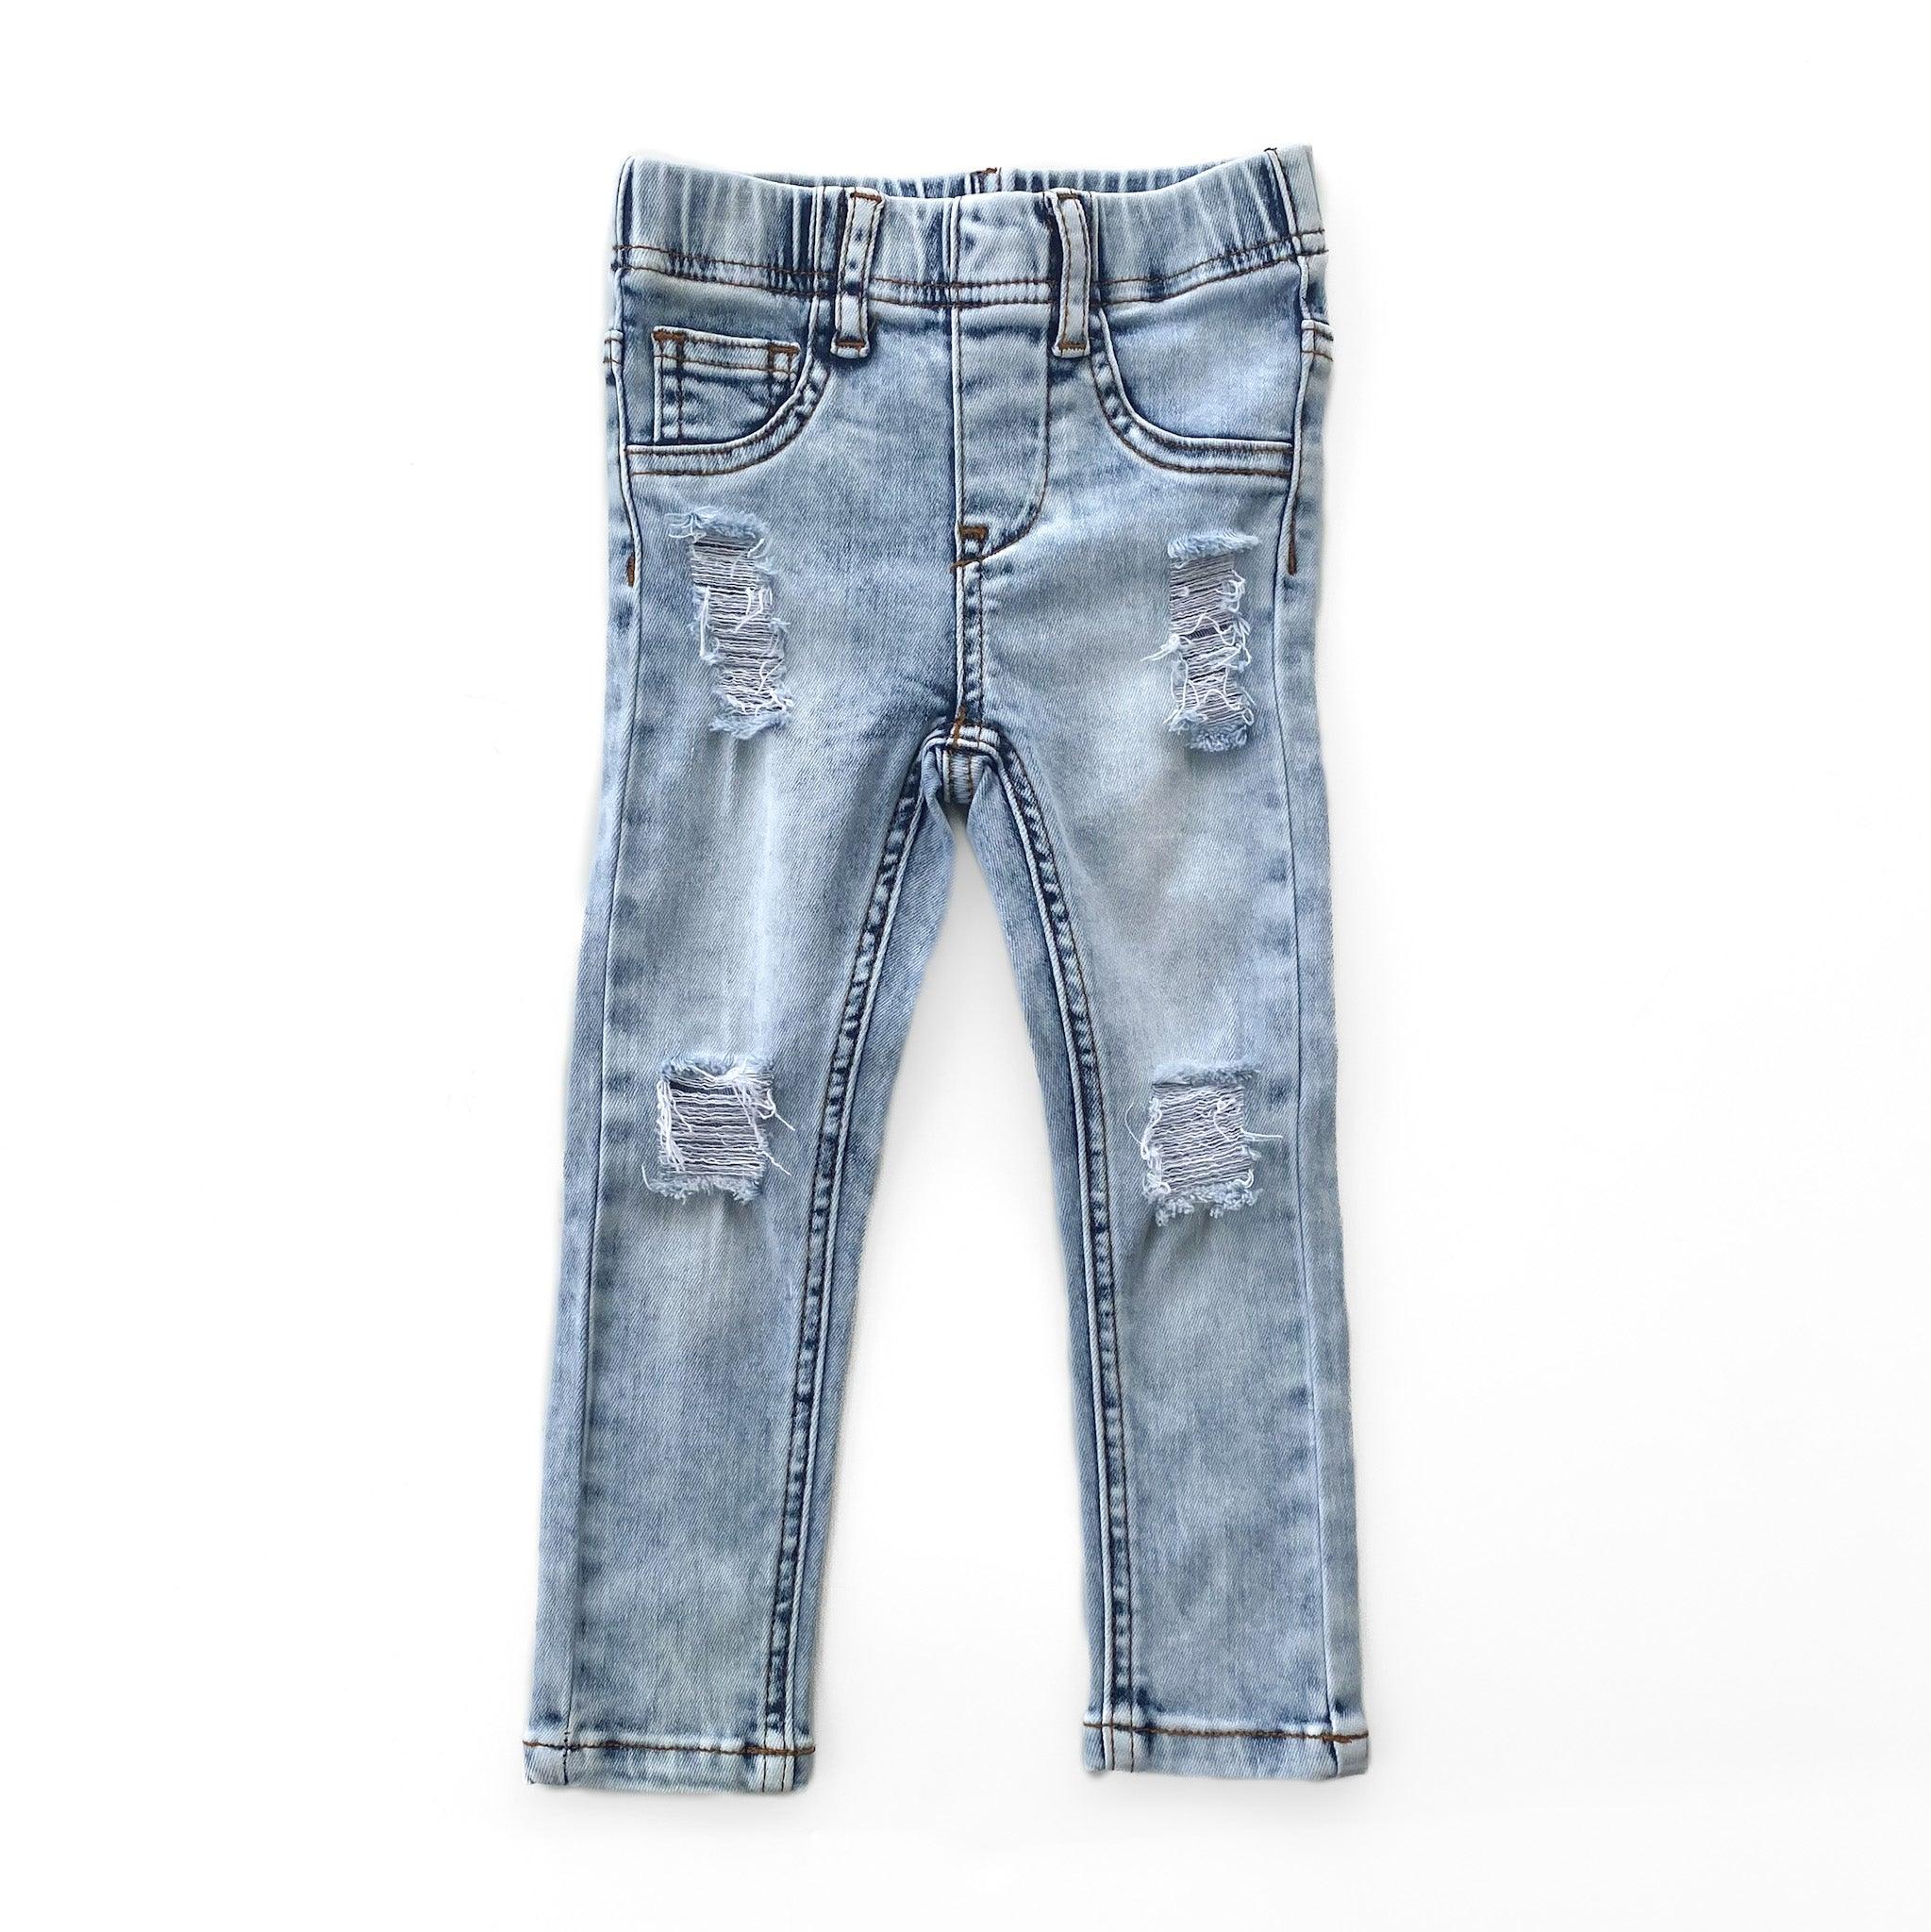 DISTRESSED JEANS - LIGHT WASH